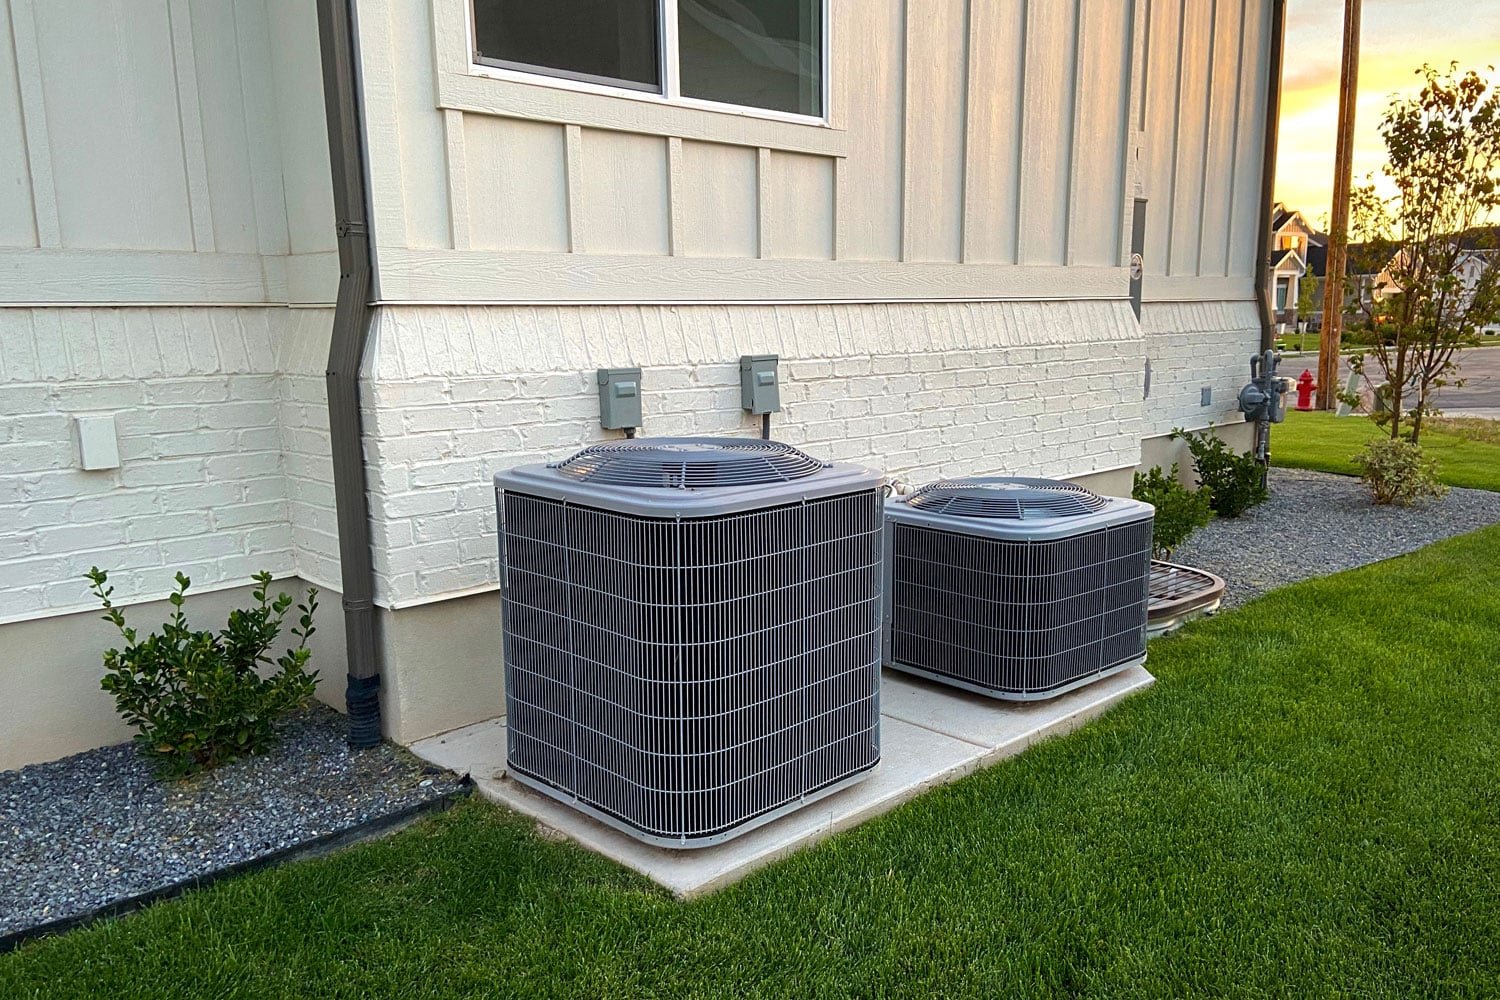 Two different sizes of air conditioning units mounted on a concrete pad 